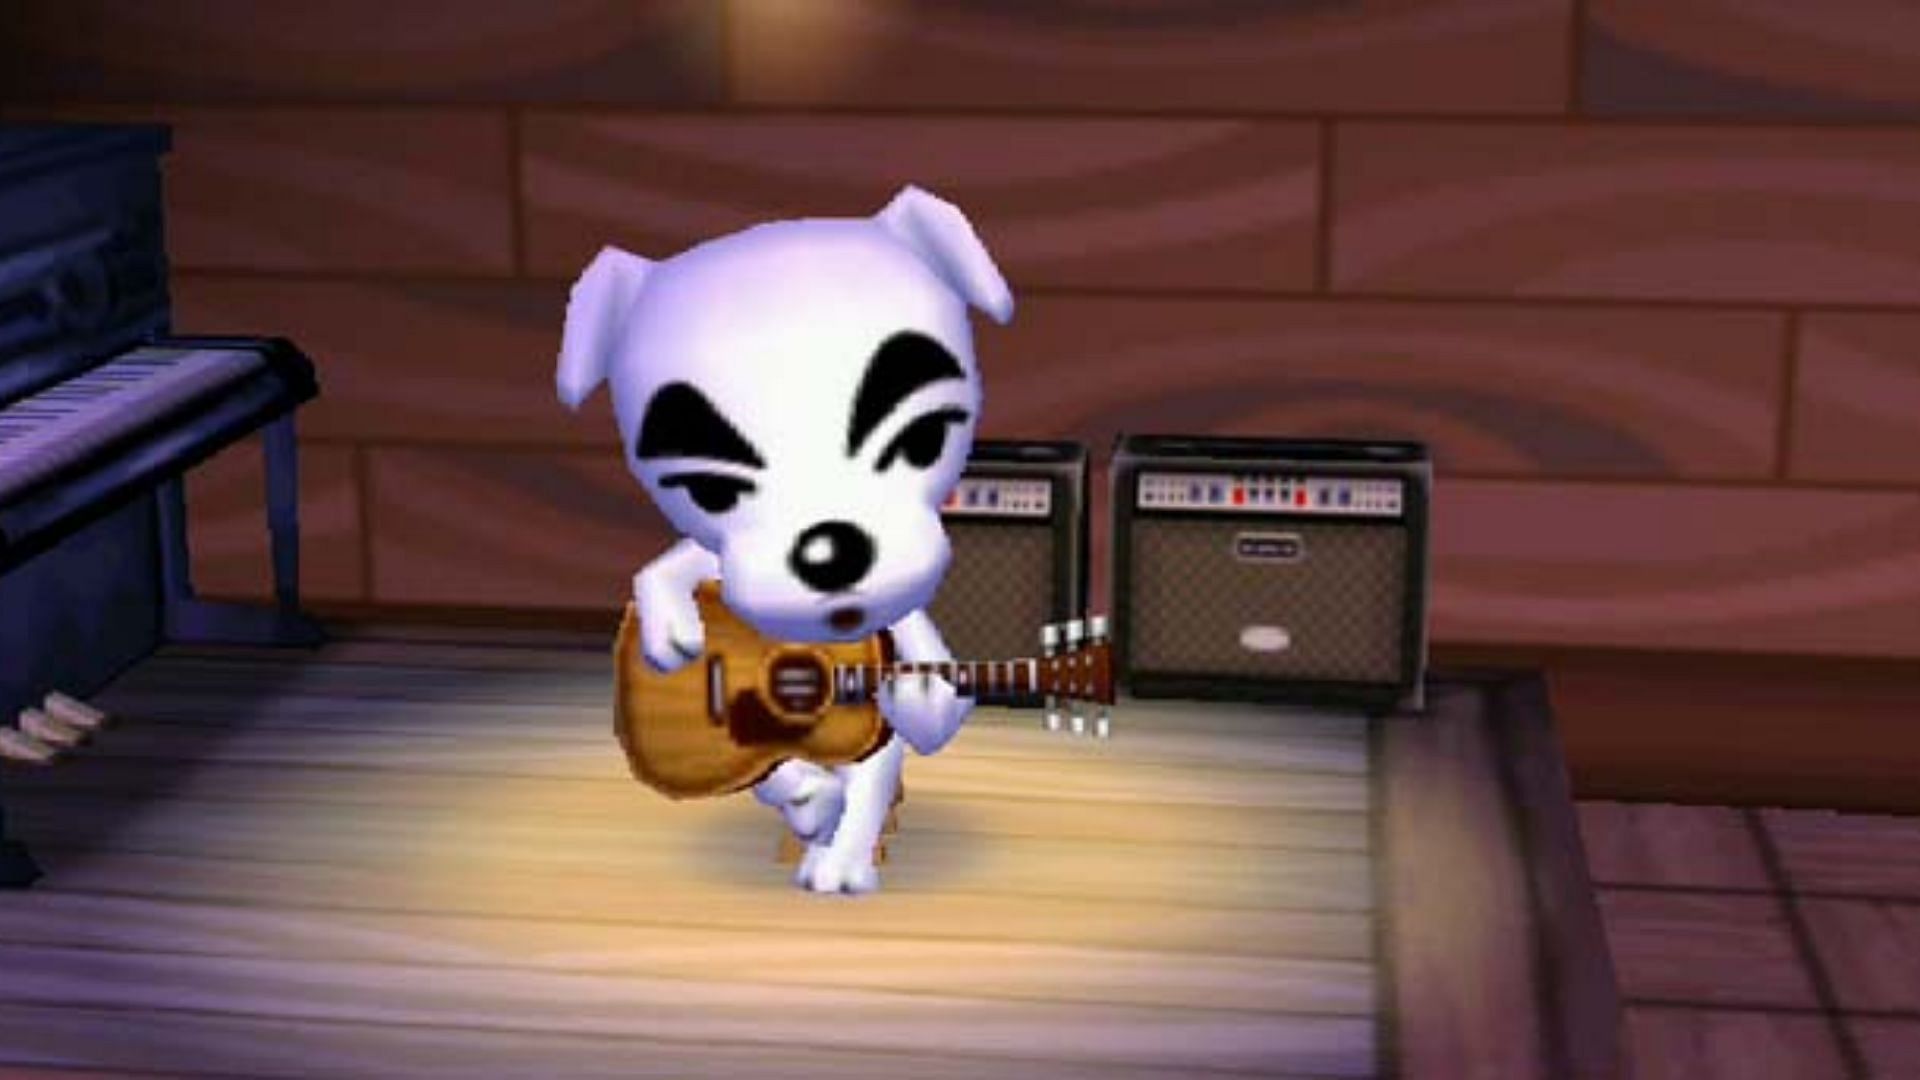 Animal Crossing: New Horizons has a vast variety of songs for players to listen to in different moods (Image via This Is My Jam)